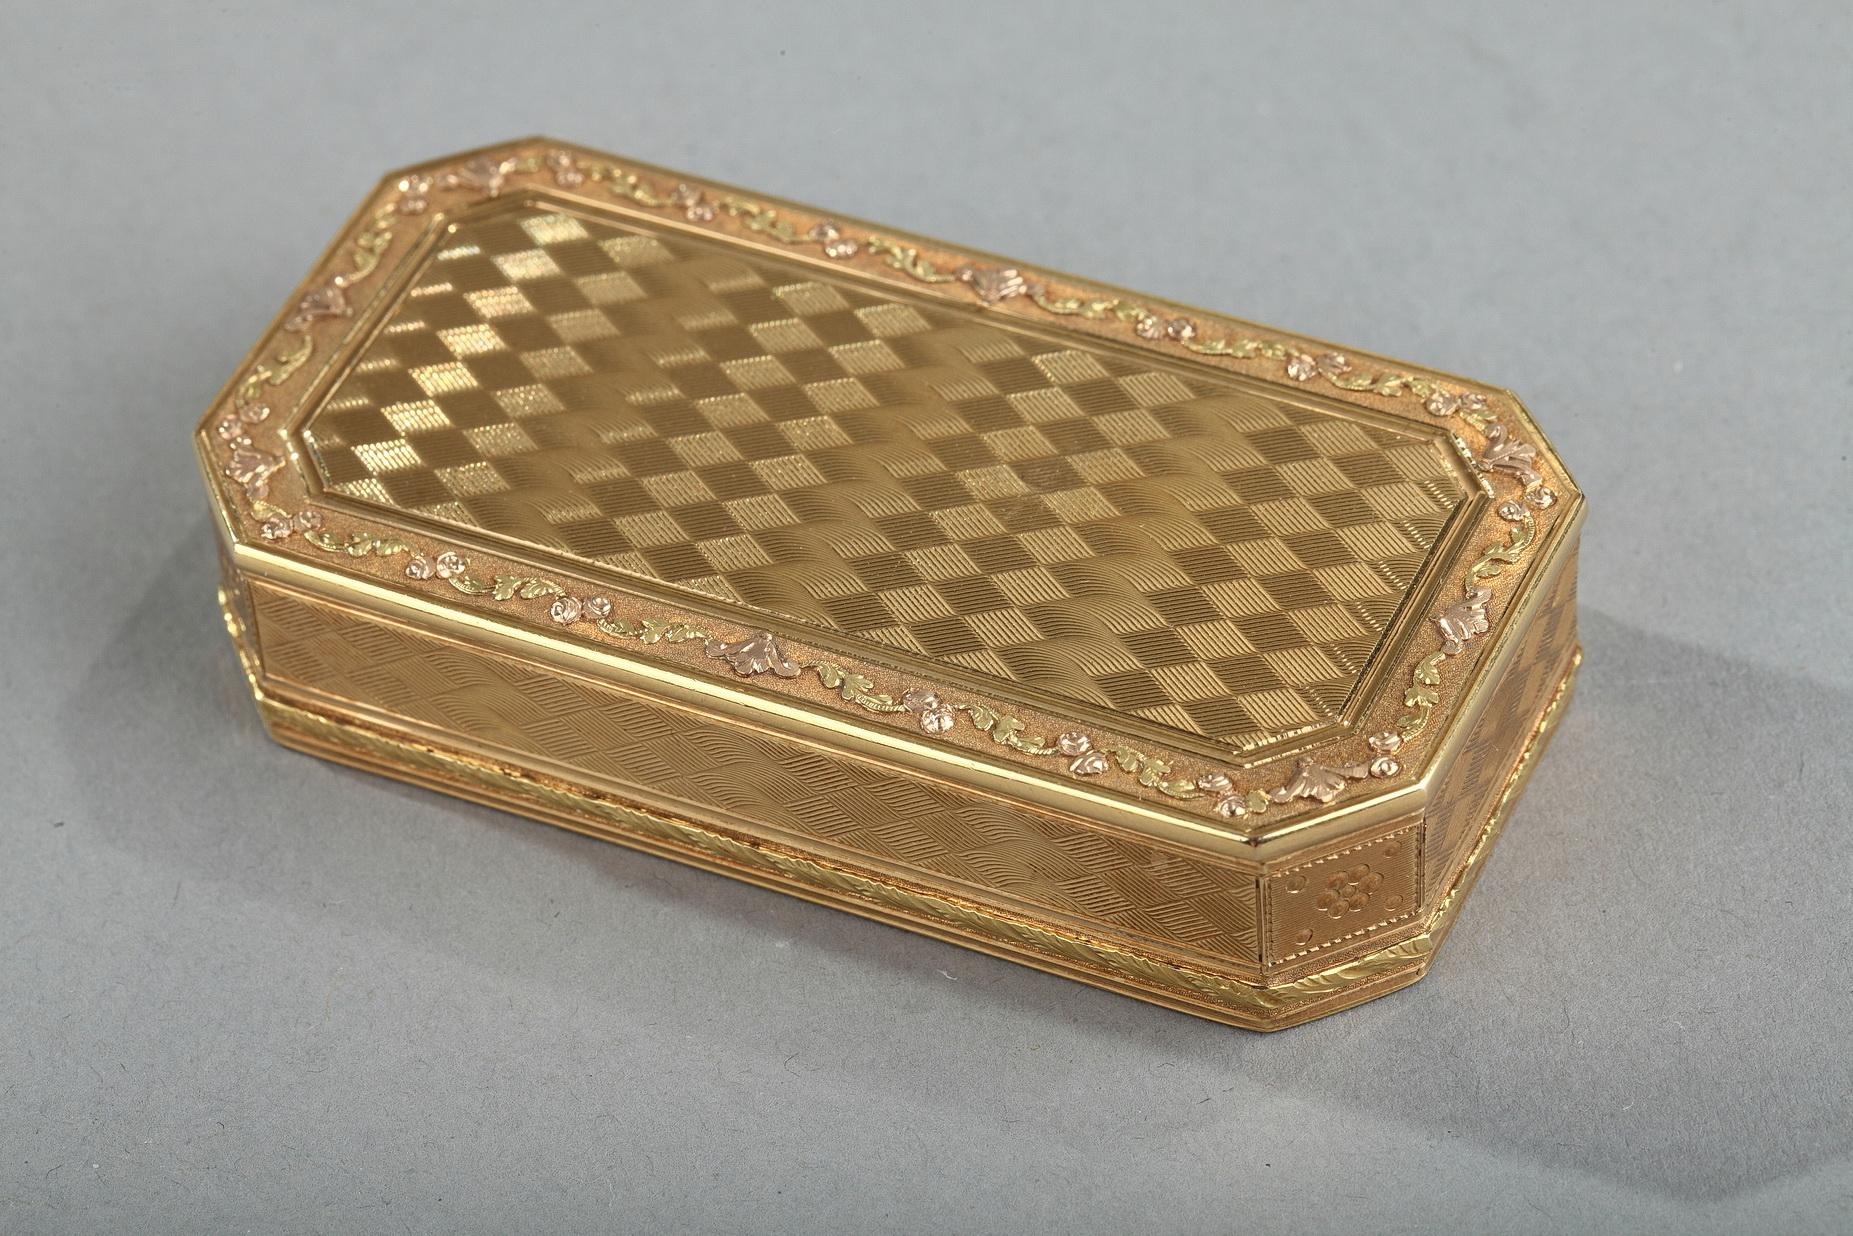 Rectangular snuffbox with angled corners sides. The box in several tons of gold presents an exceptional ‘guilloché’ decoration in lozenge reminding a work of basketry. This elegant work is framed by a stylized floral frieze with several shades of